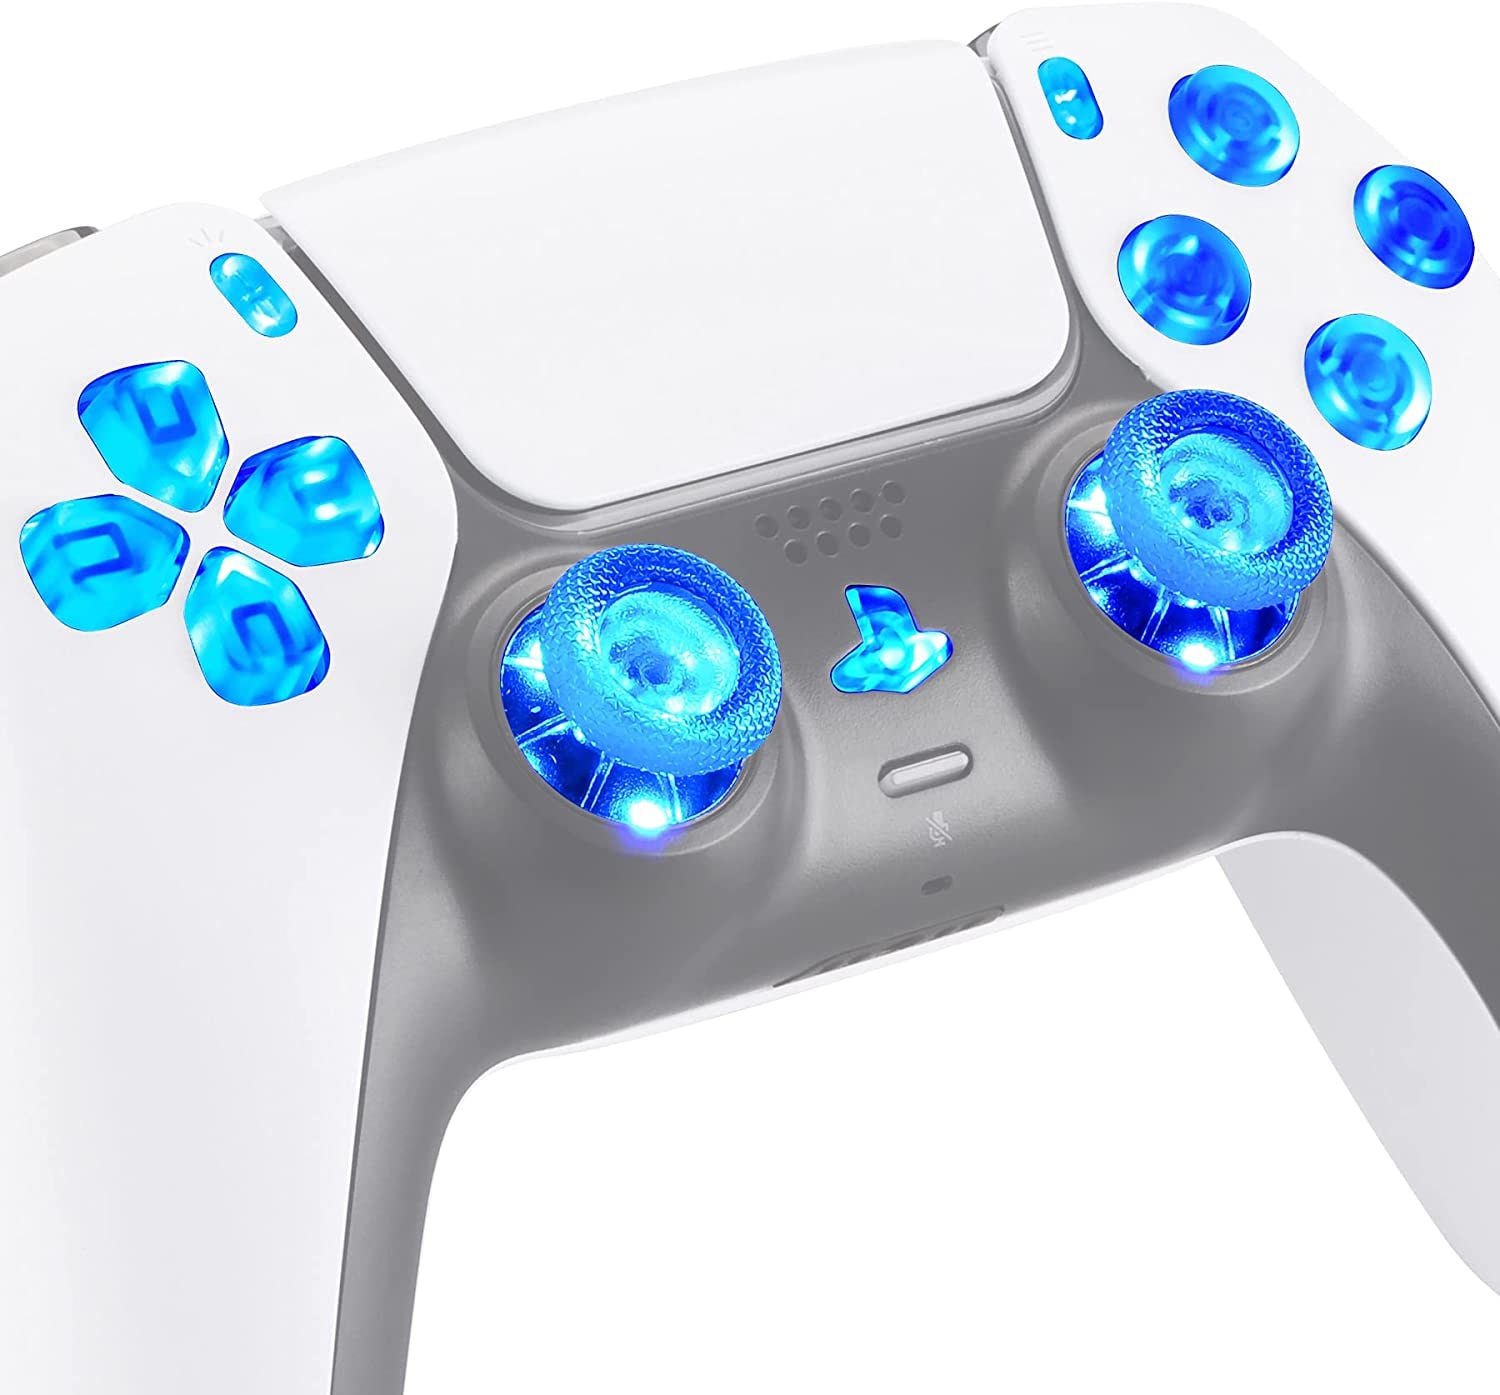 Multi-Colors luminated D-pad Thumbstick Share Option Home Face Buttons for PS5 Controller BDM-010 7 Colors DTF LED Kit Gaming - 1